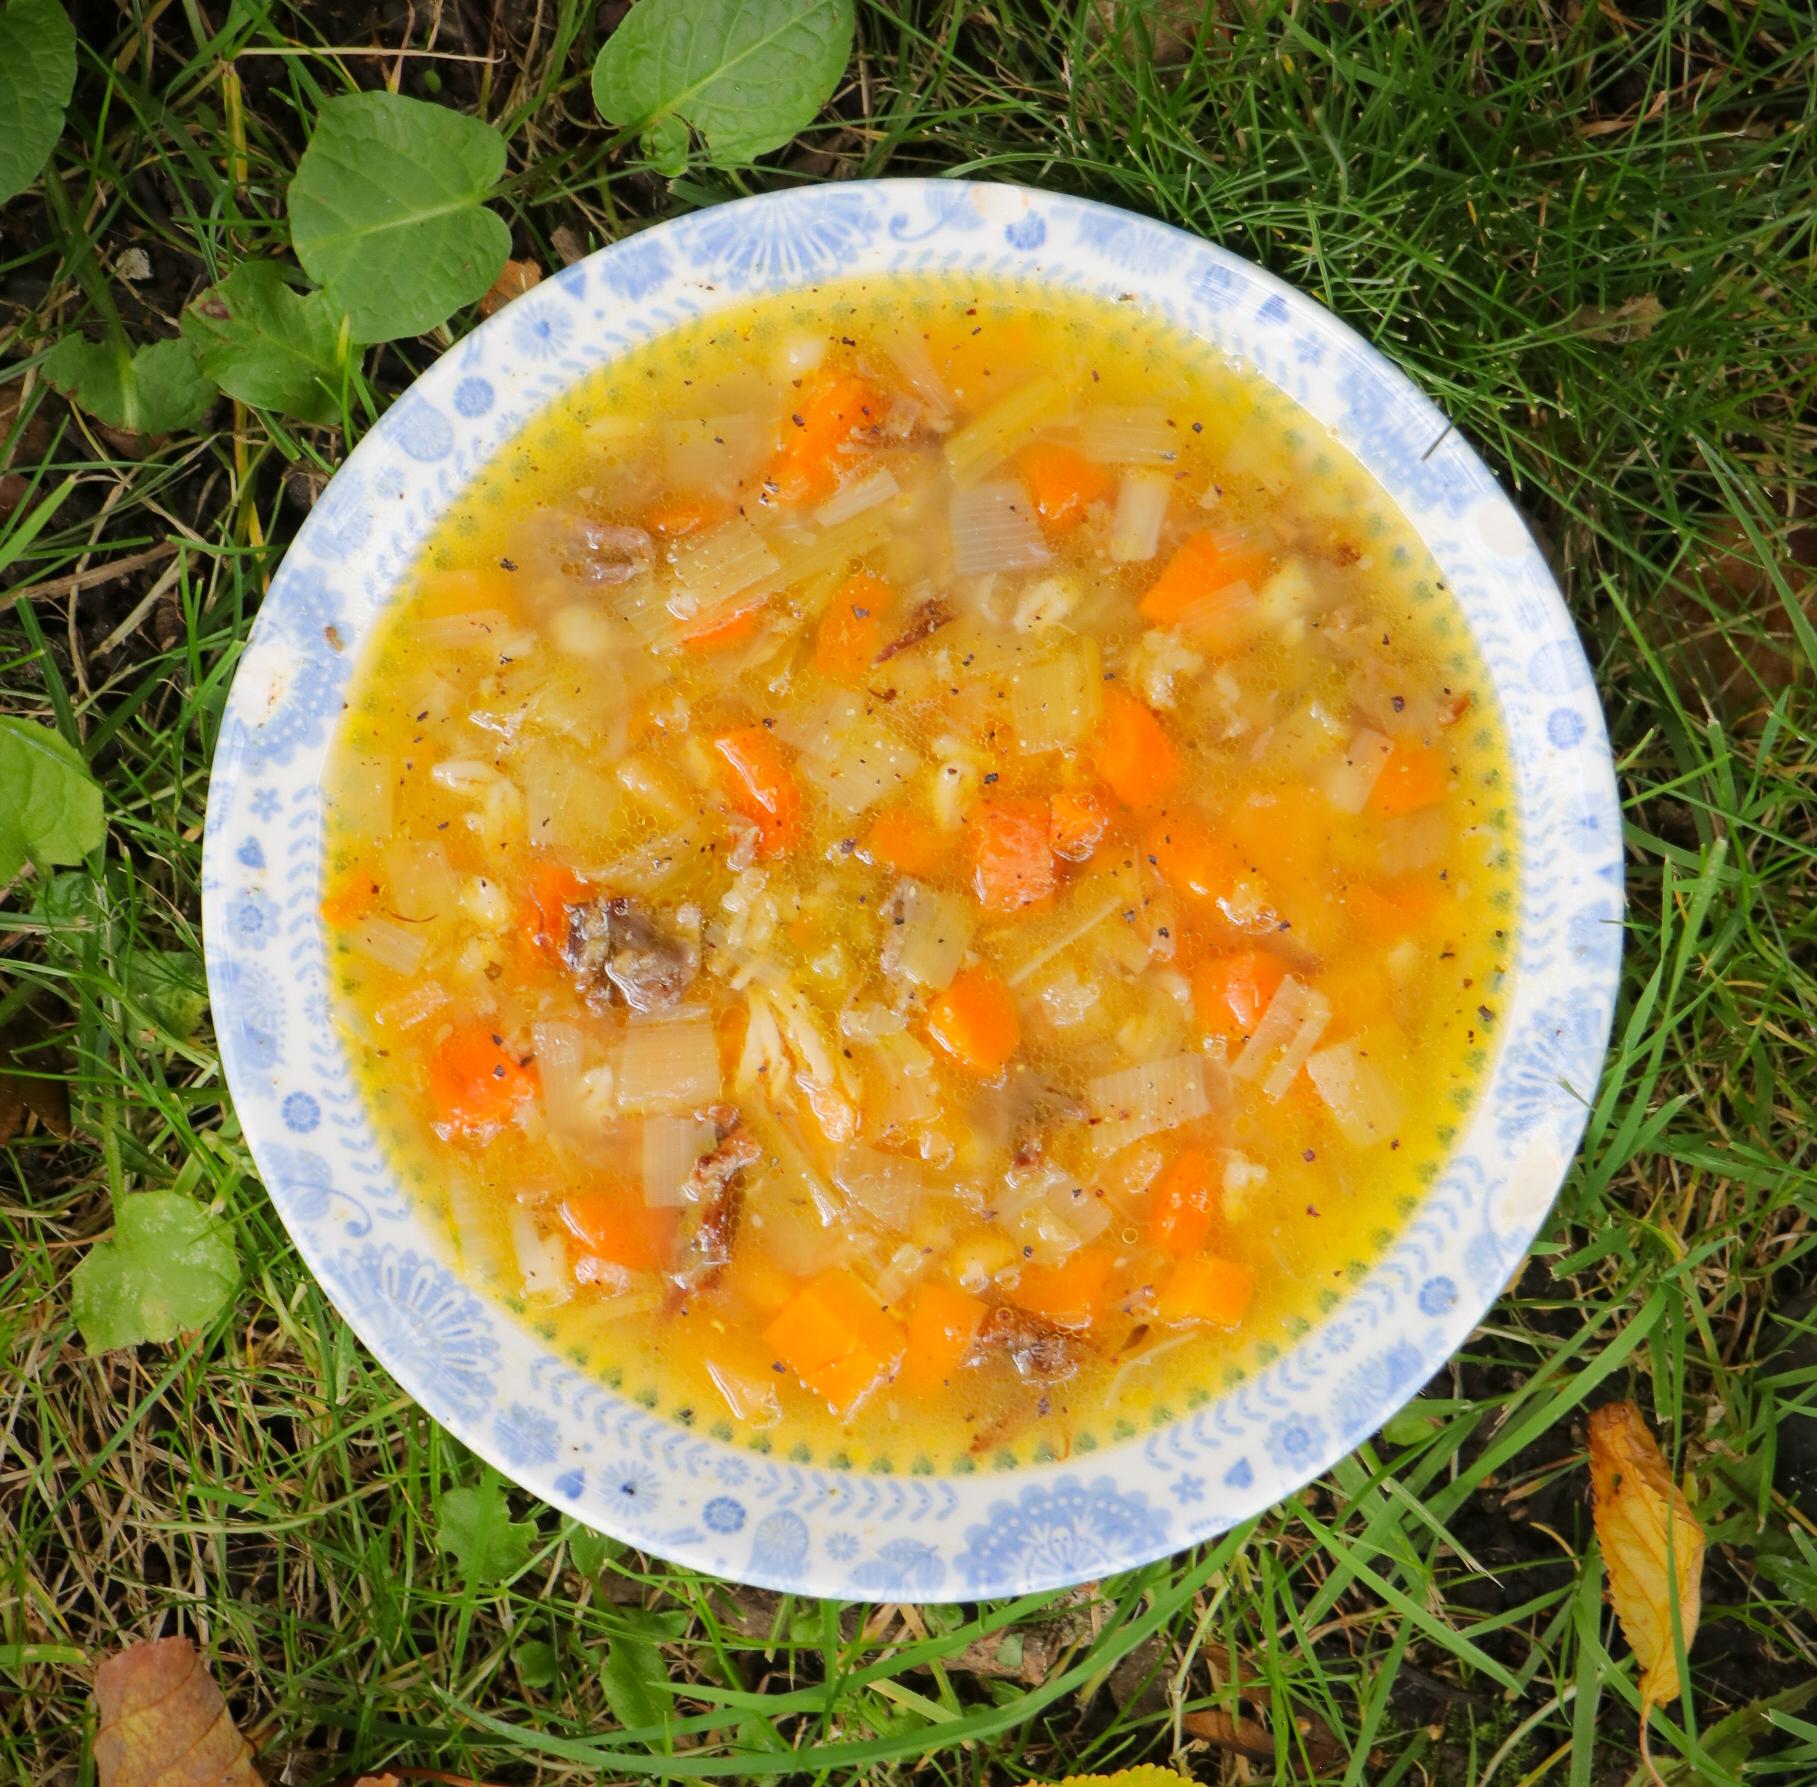  Hearty and nourishing, nothing beats a homemade soup